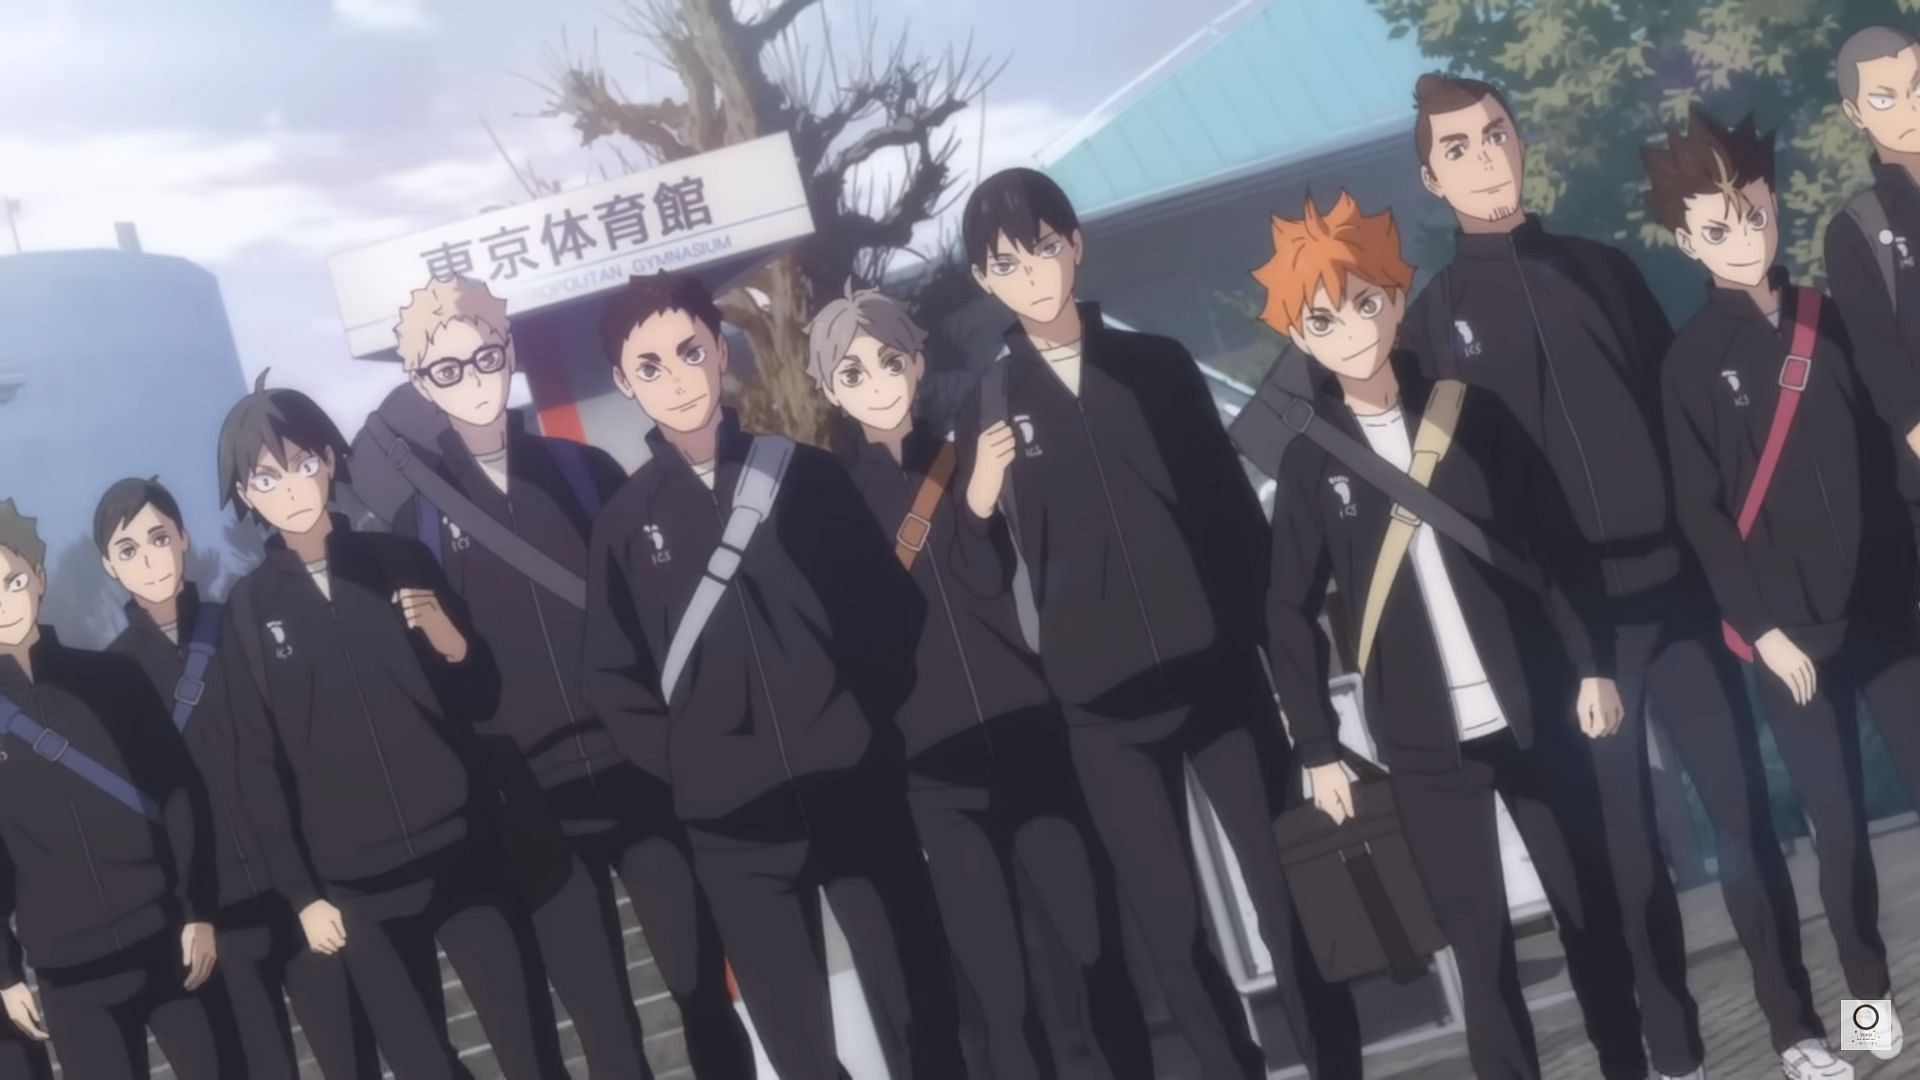 Karasuno volleyball team as shown in the movie (Image via Production I.G.)